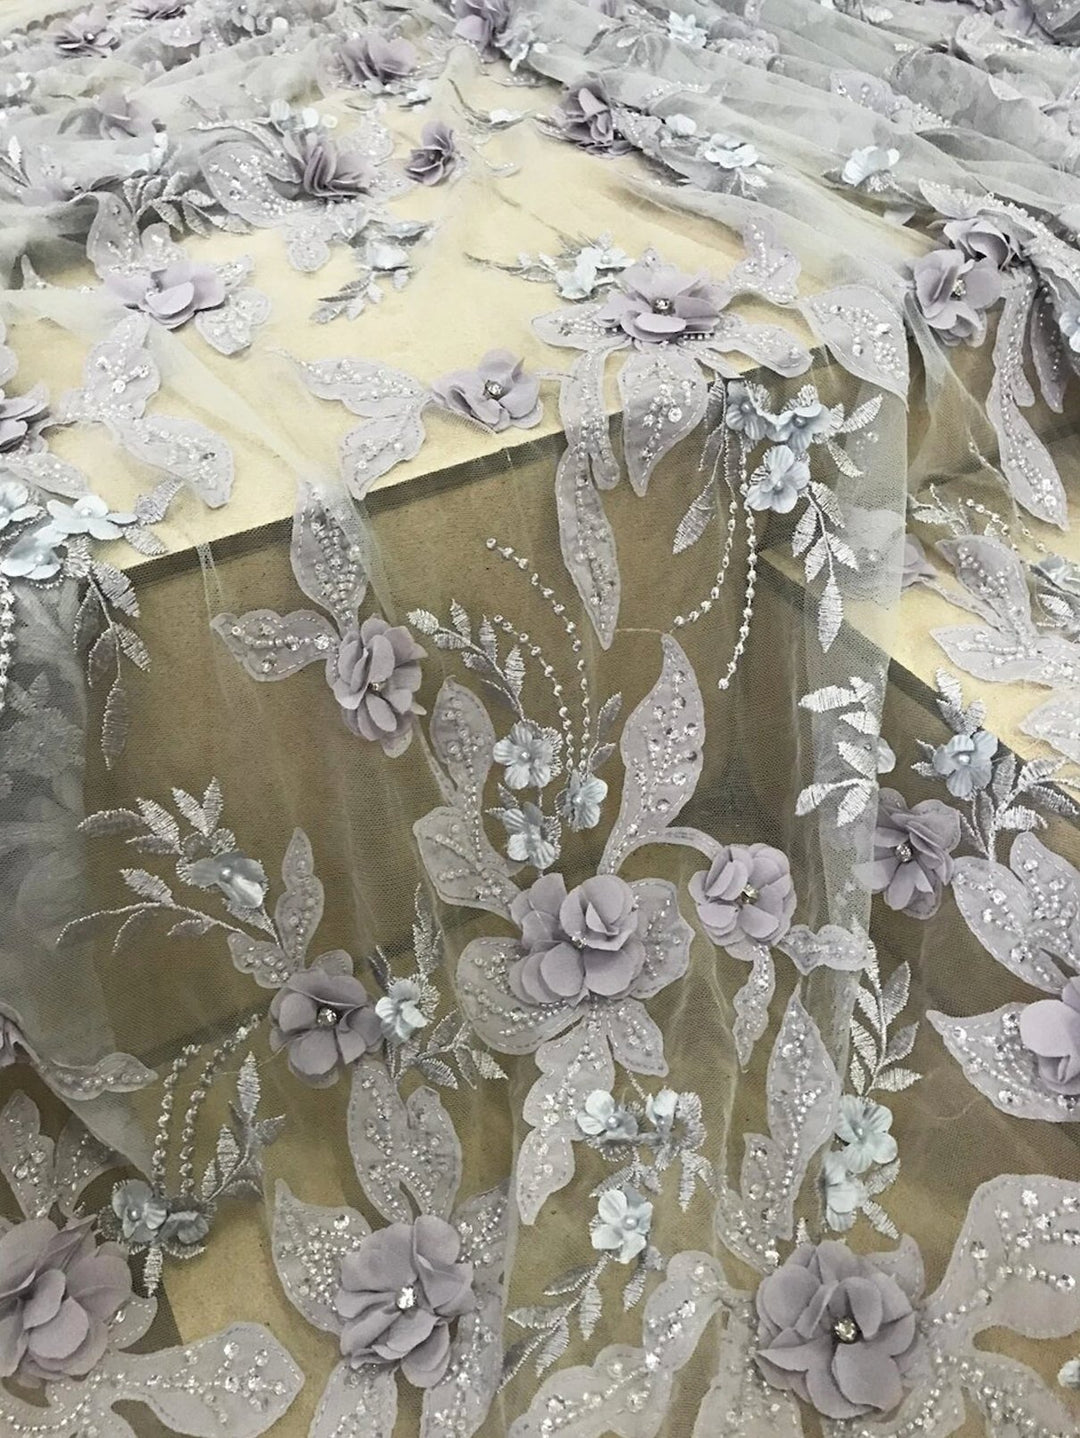 Beige floral pattern embroidery with sequins on tulle lace fabric - 3D lace  & embroidery - lace fabric from